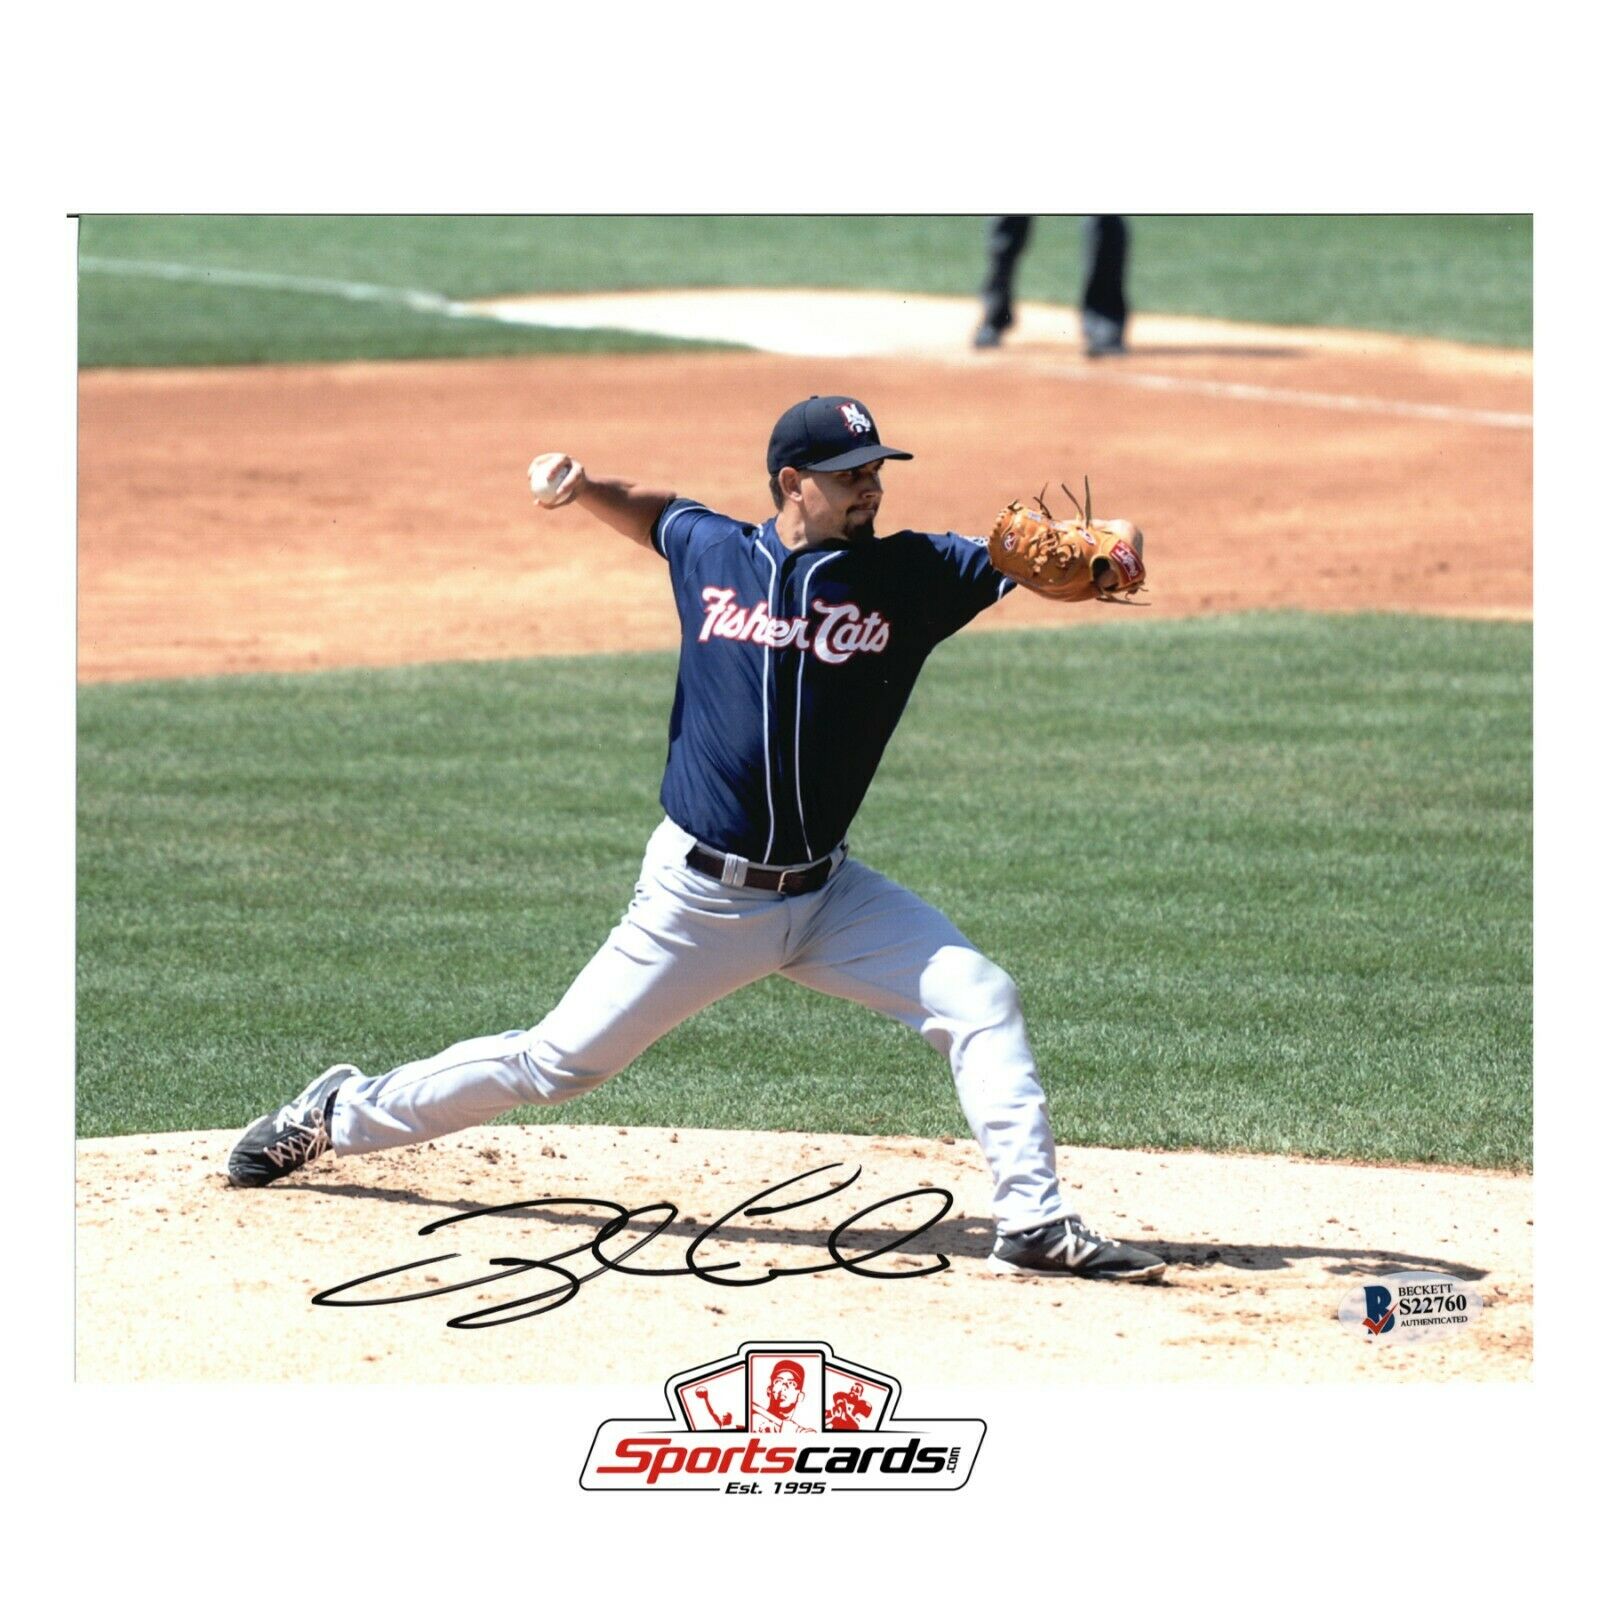 Taylor Cole Signed 8x10 Photo BAS Beckett Auto Los Angeles Angels